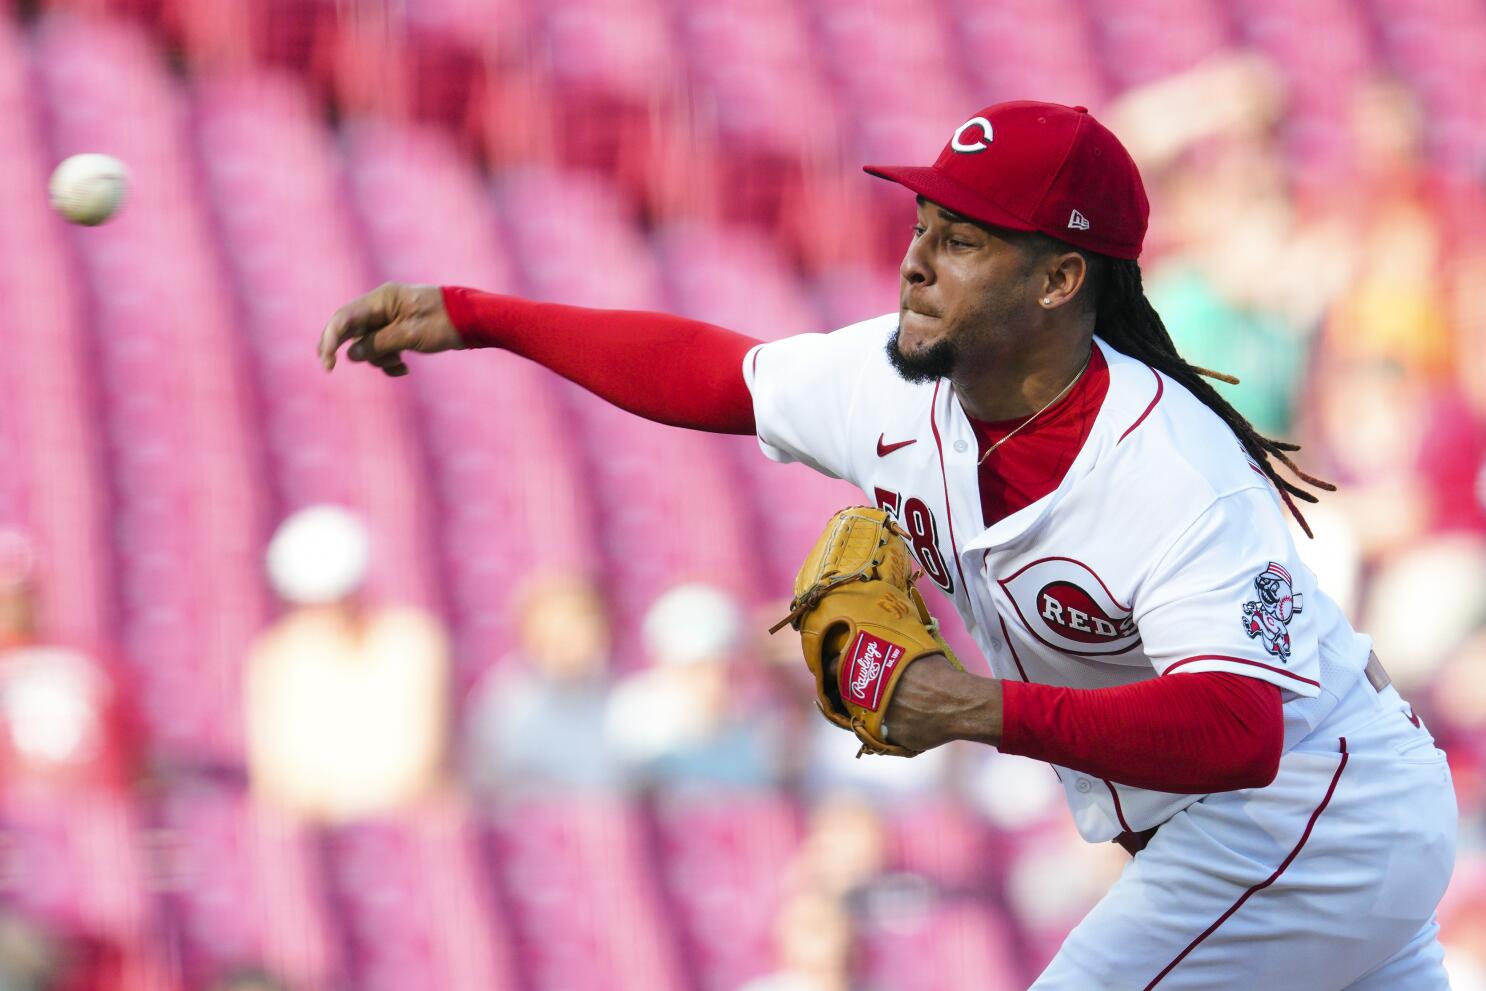 Luis Castillo traded to Mariners: The starts that defined Reds career